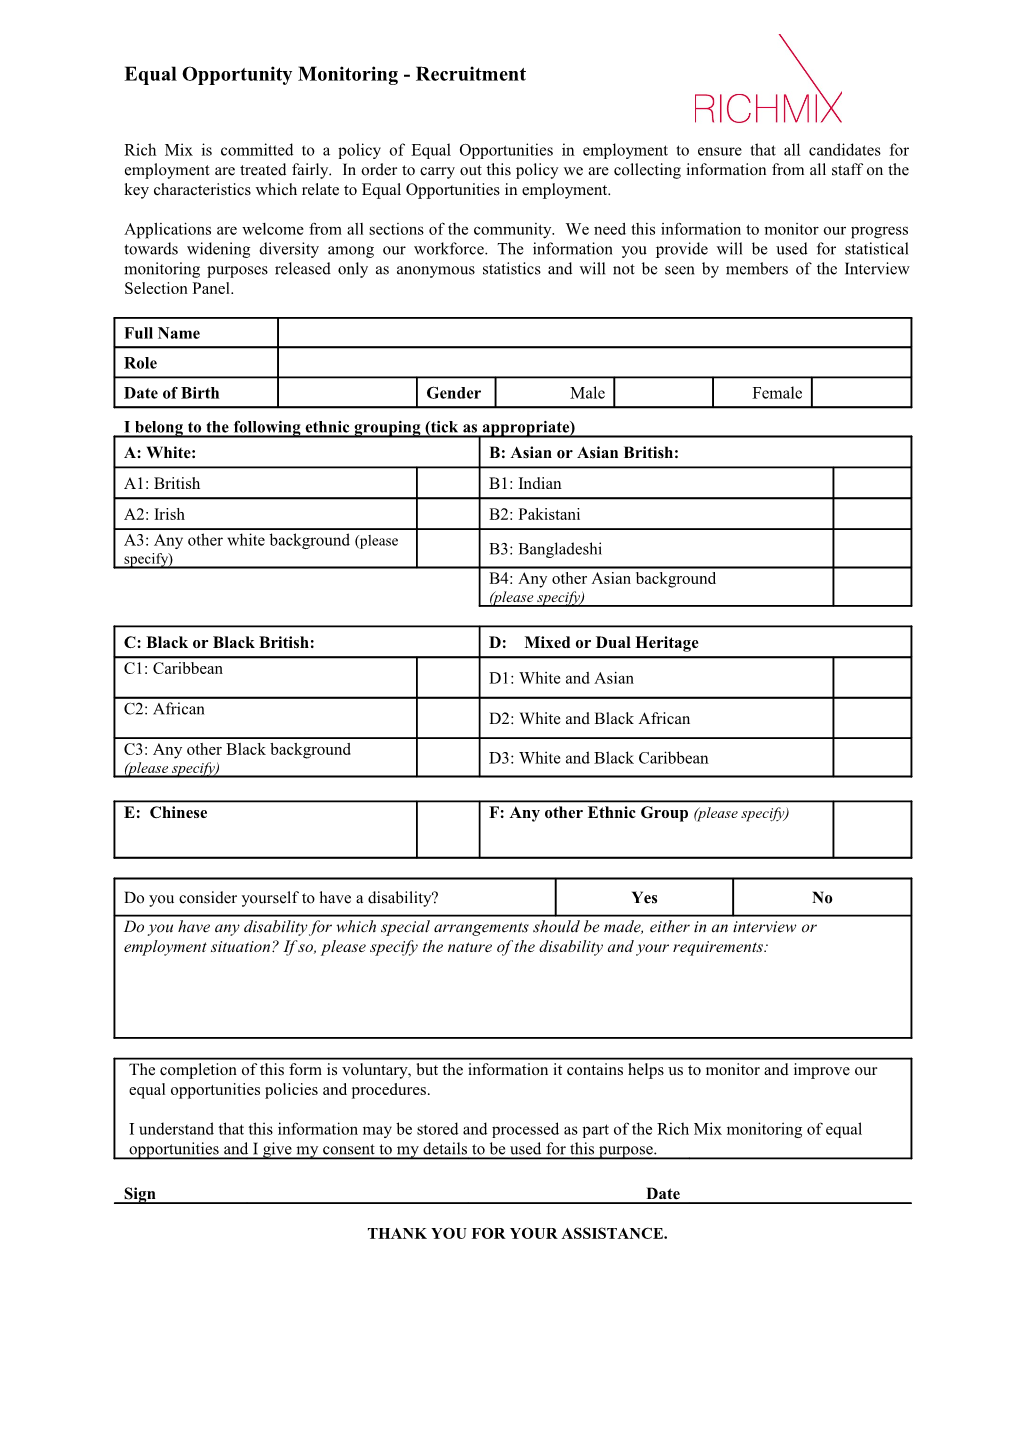 Equal Opportunity Monitoring Form Contact a Family